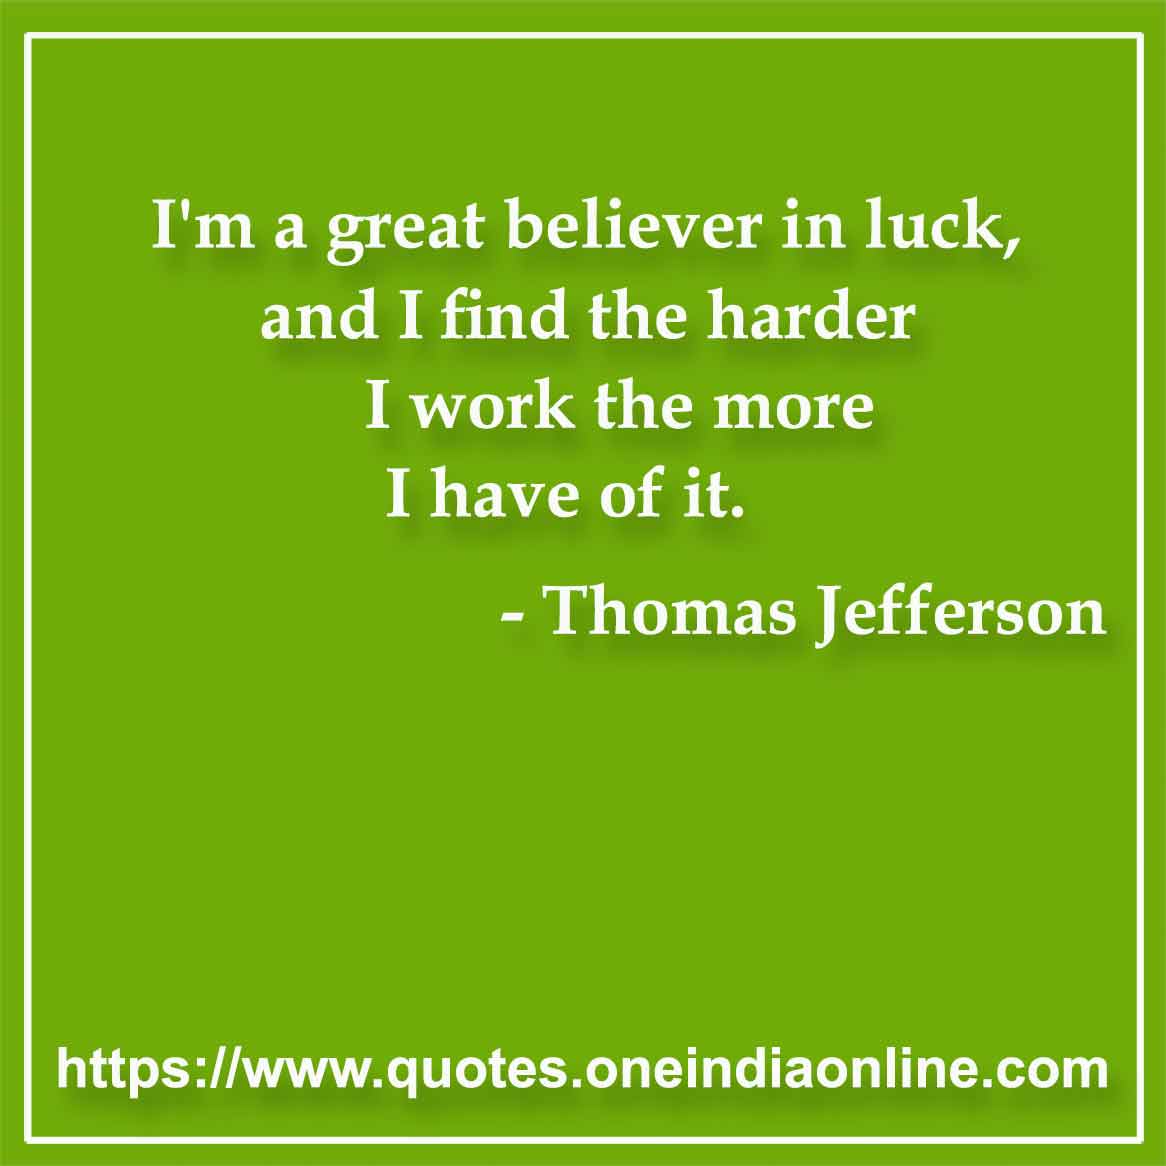 I'm a great believer in luck, and I find the harder I work the more I have of it.